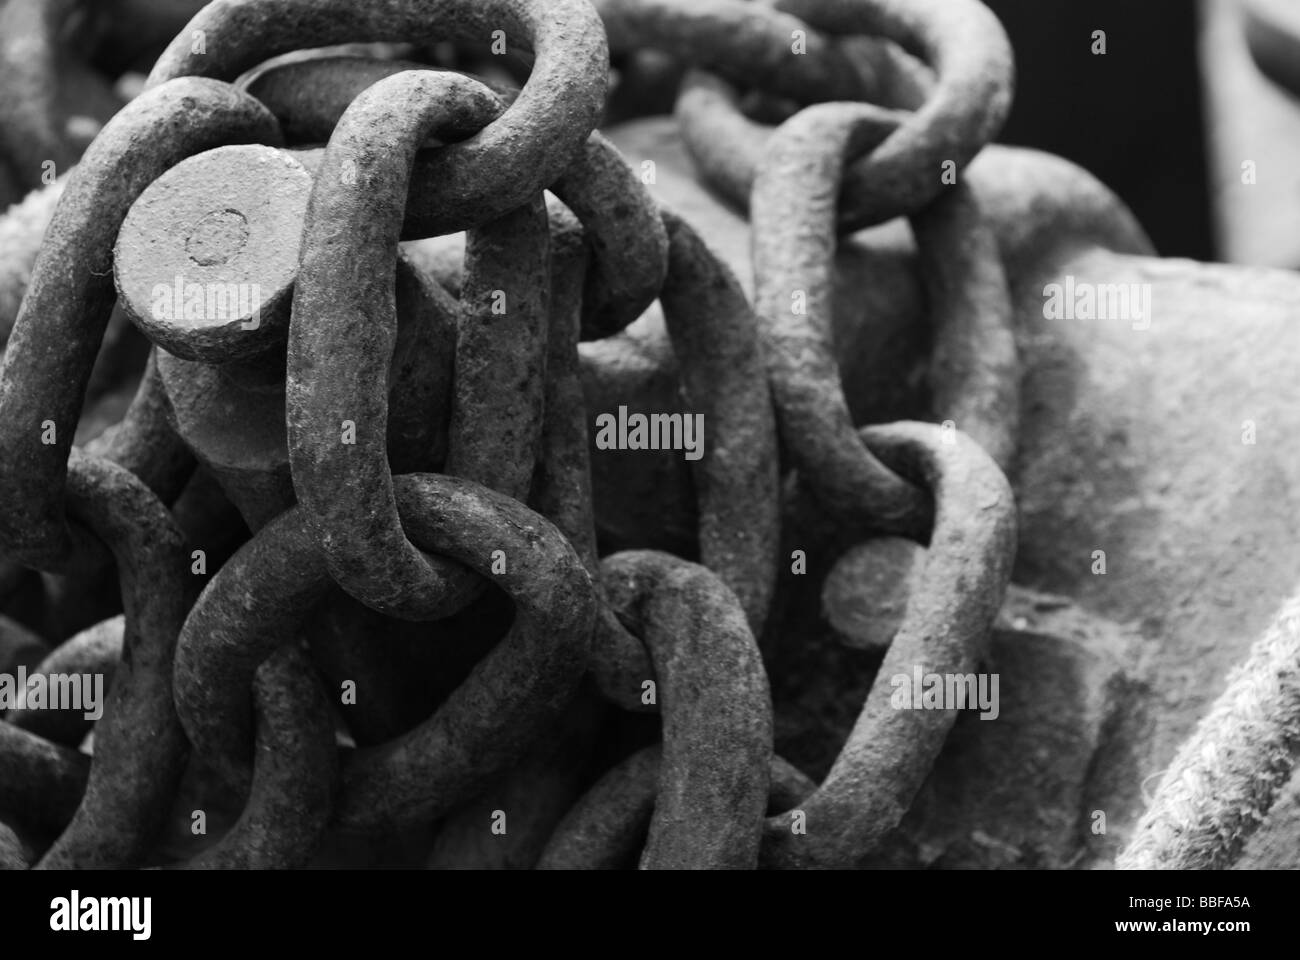 Chains on machinery, in monochrome Stock Photo